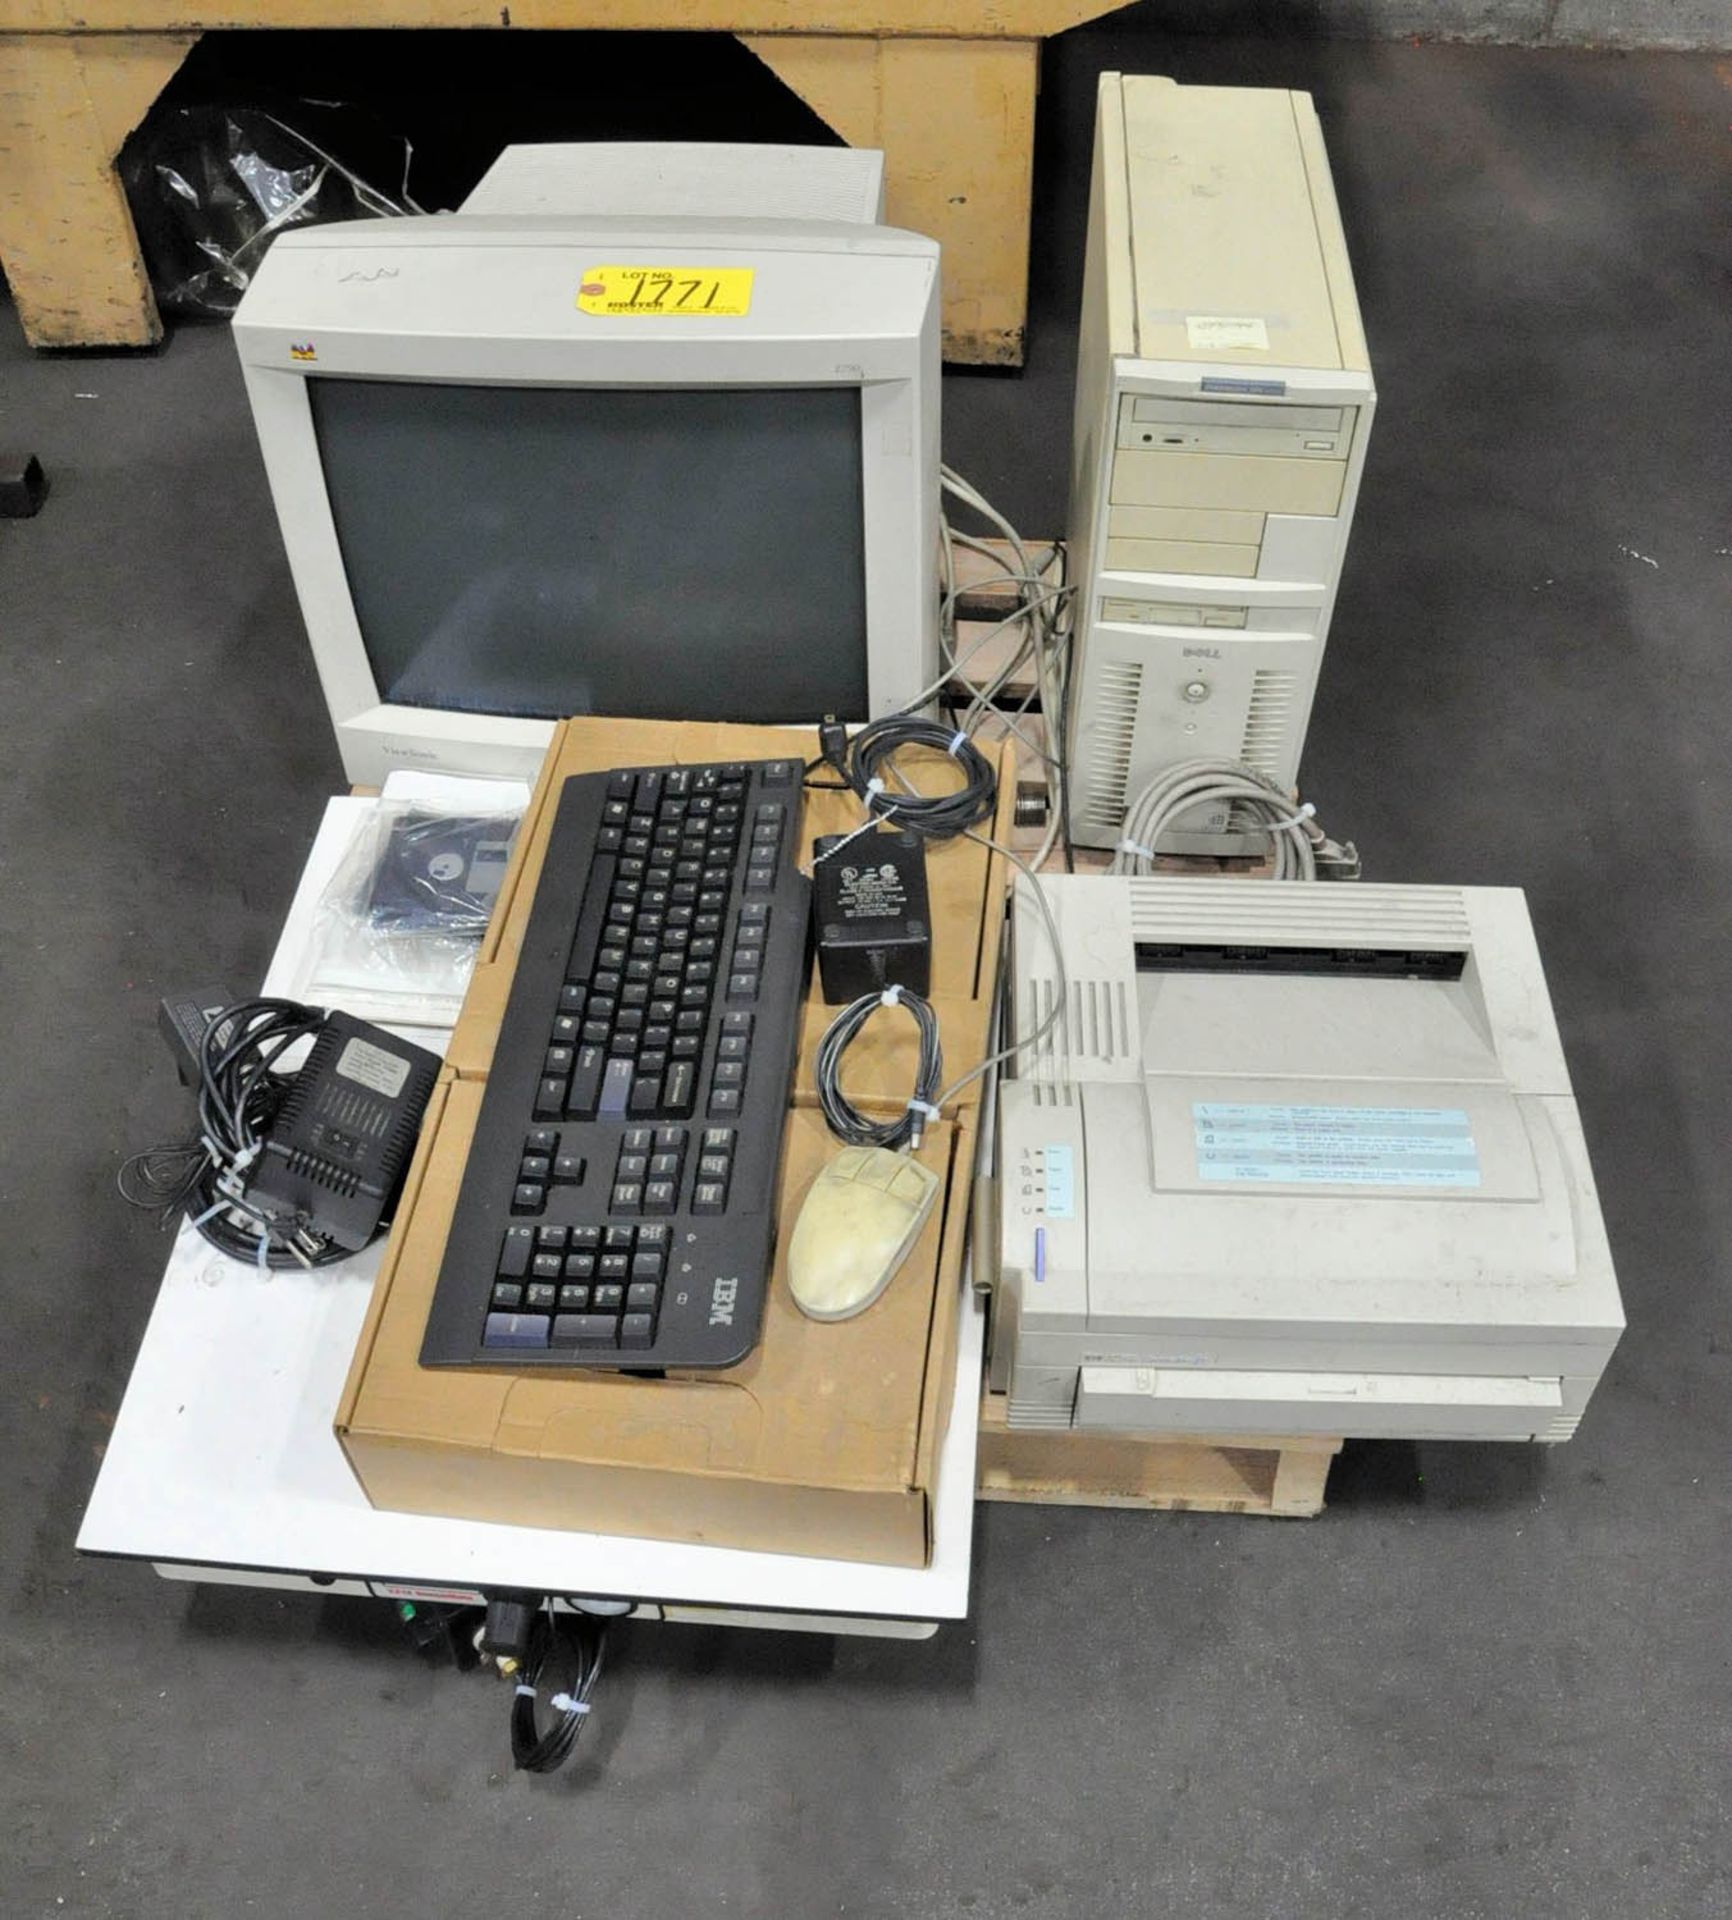 BUEHLER MDL.2000, AUTOMATIC HARDNESS TESTER, S/N: 2000, WITH COMPUTER, PRINTER, MONITOR, ETC. ON (1) - Image 2 of 2